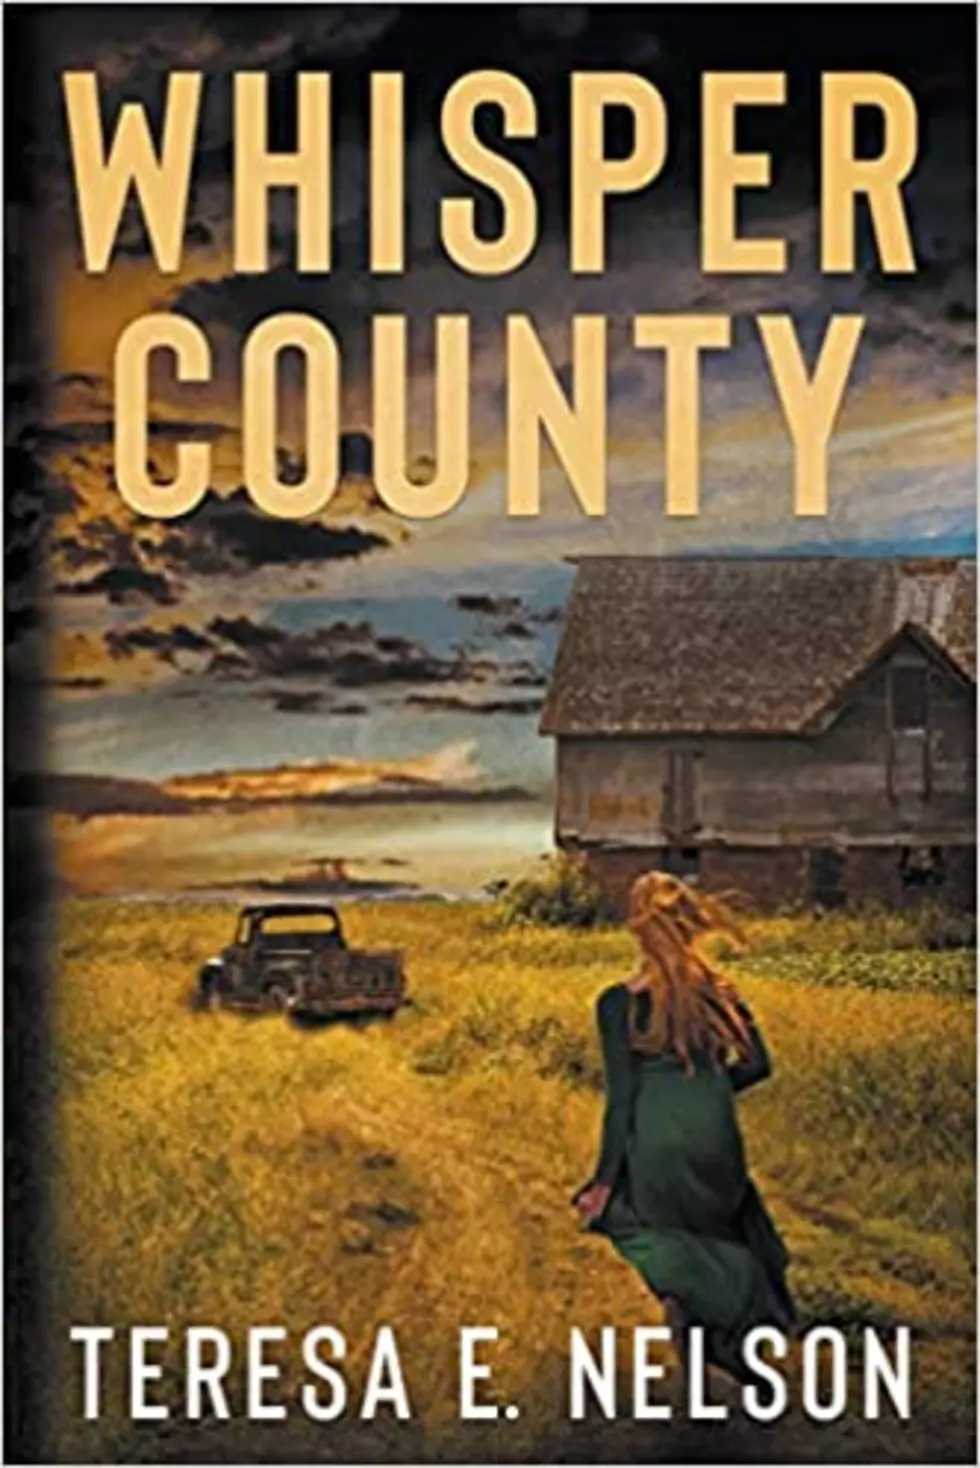 MN Author Teresa Nelson’s “Whisper County” is a Page-Turner